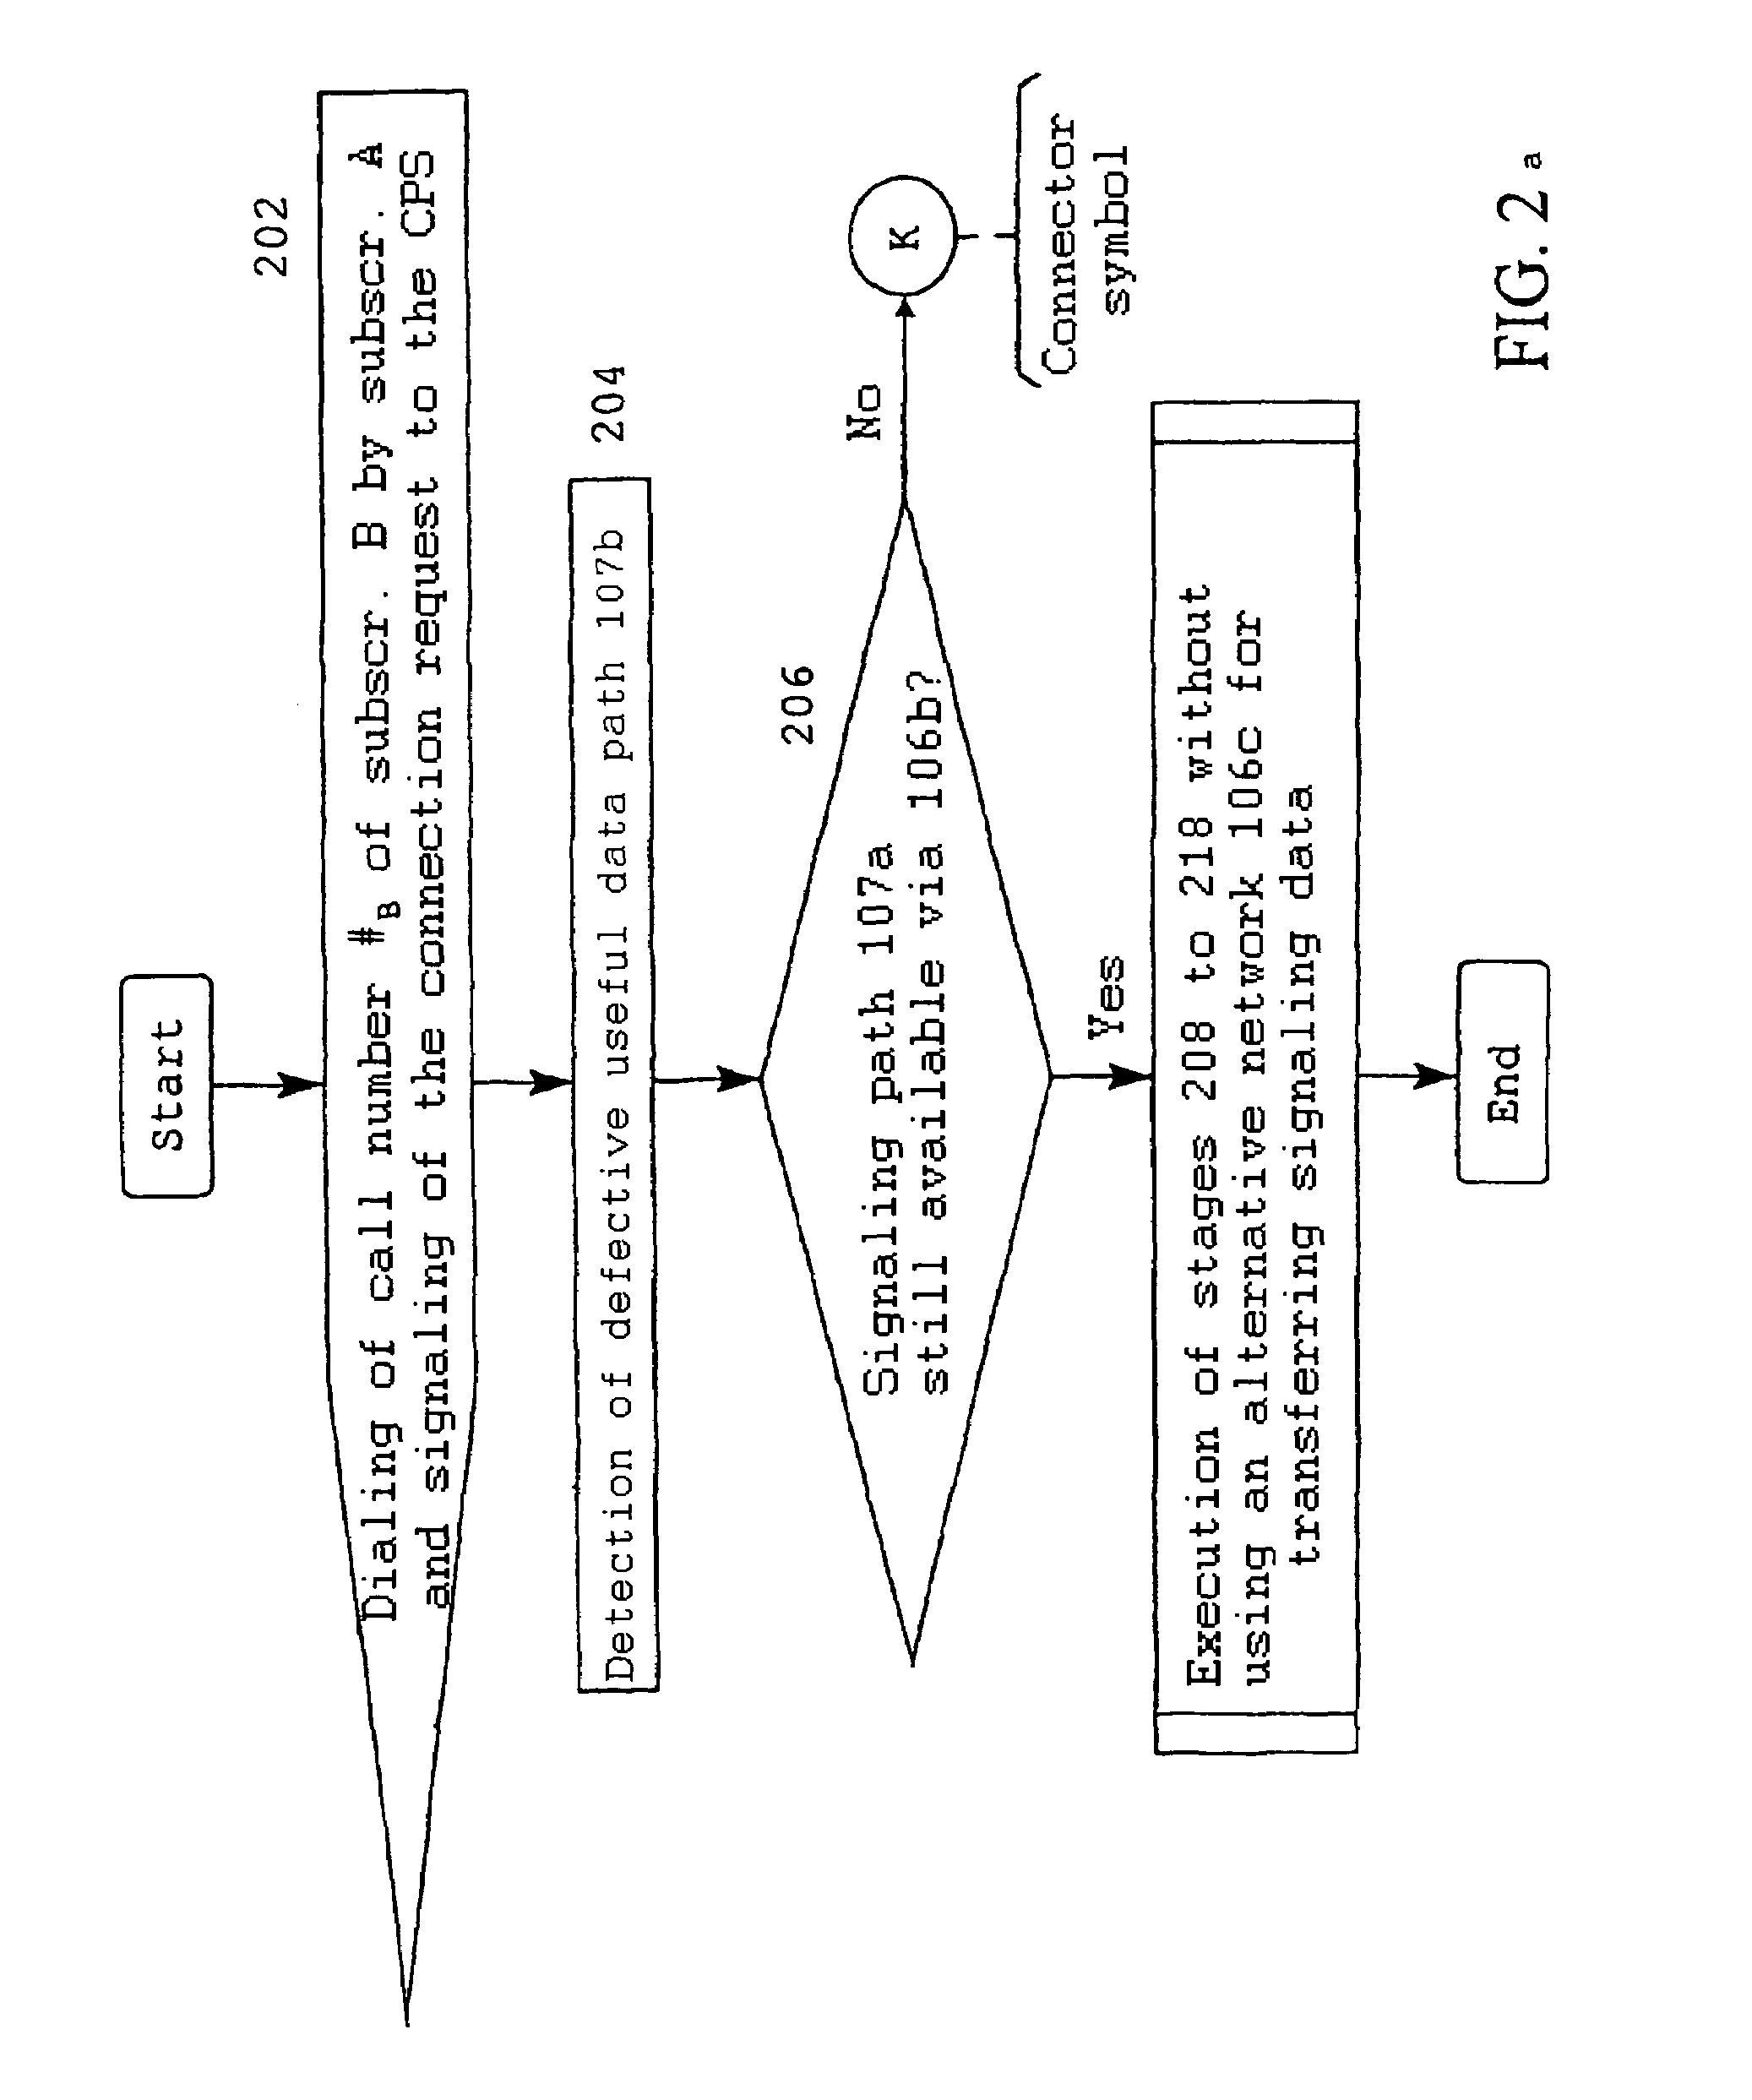 Method for making available features for alternative connections of primary connections